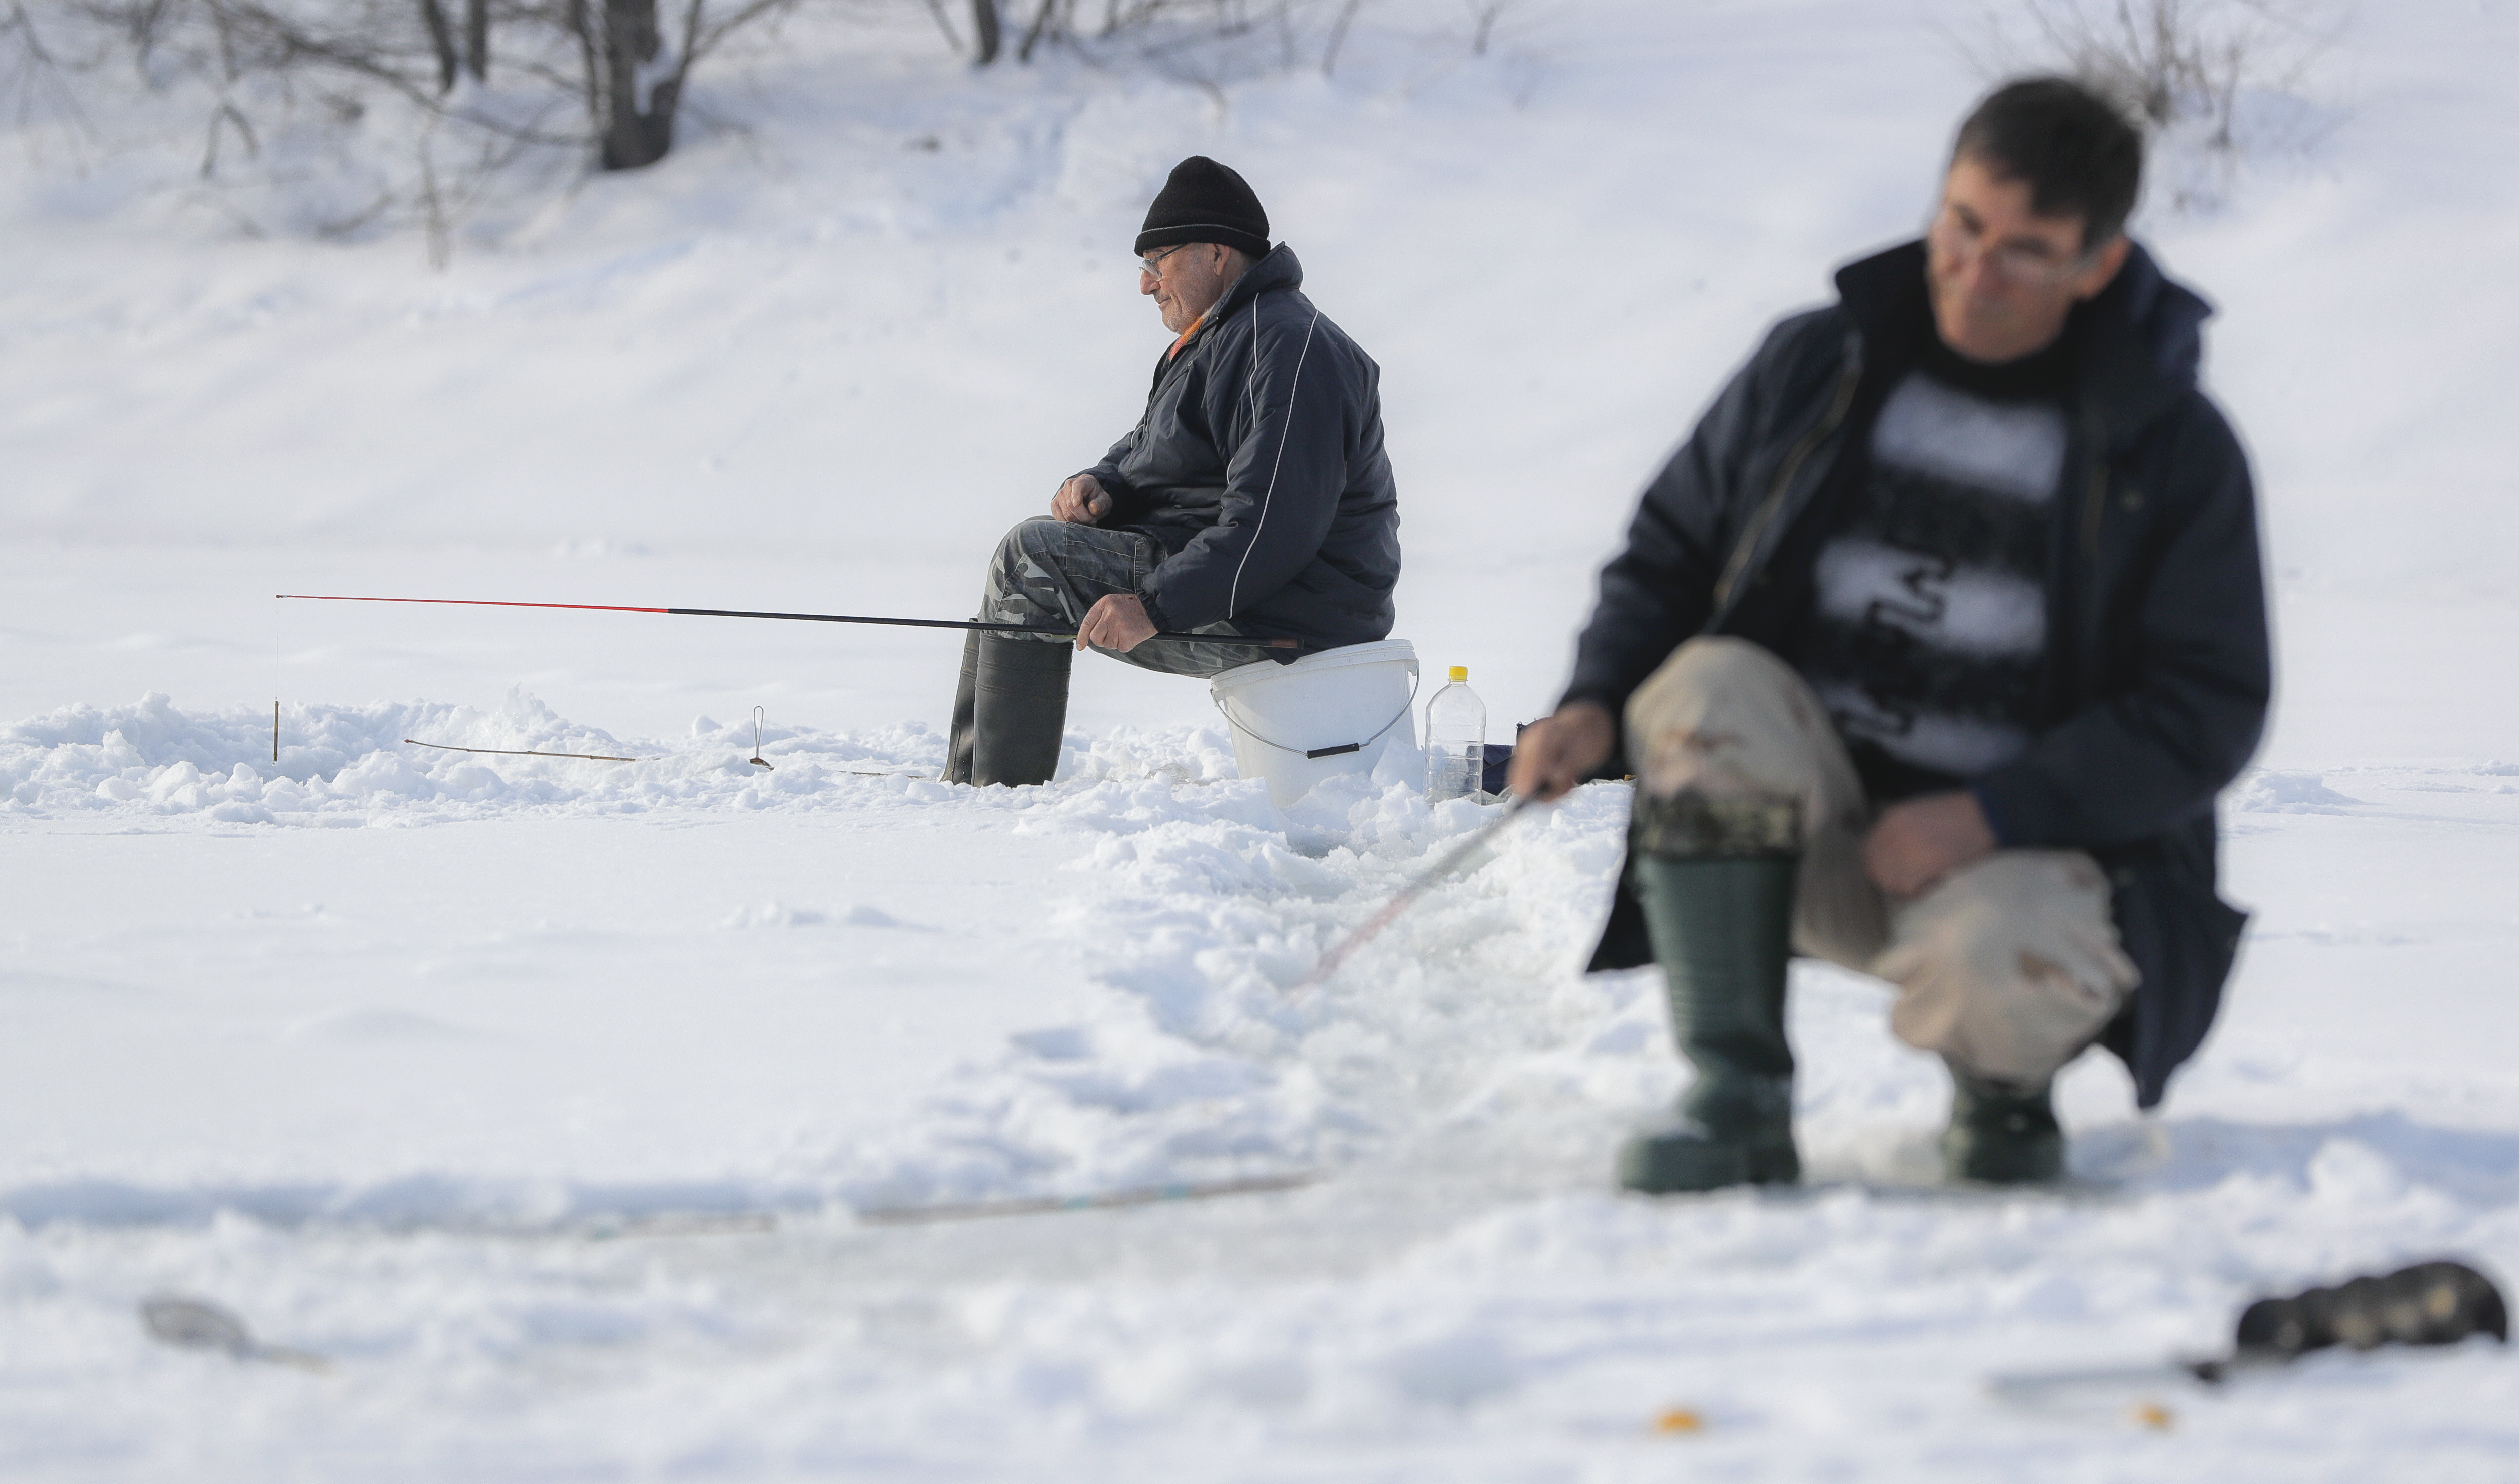 People fish on a frozen lake on the outskirts of Bucharest, Romania, Friday, Jan. 13, 2017. The Romanian capital experienced milder weather after a week of blizzards and extreme cold that caused a major disruption of the road and railway transport. (AP Photo/Vadim Ghirda)